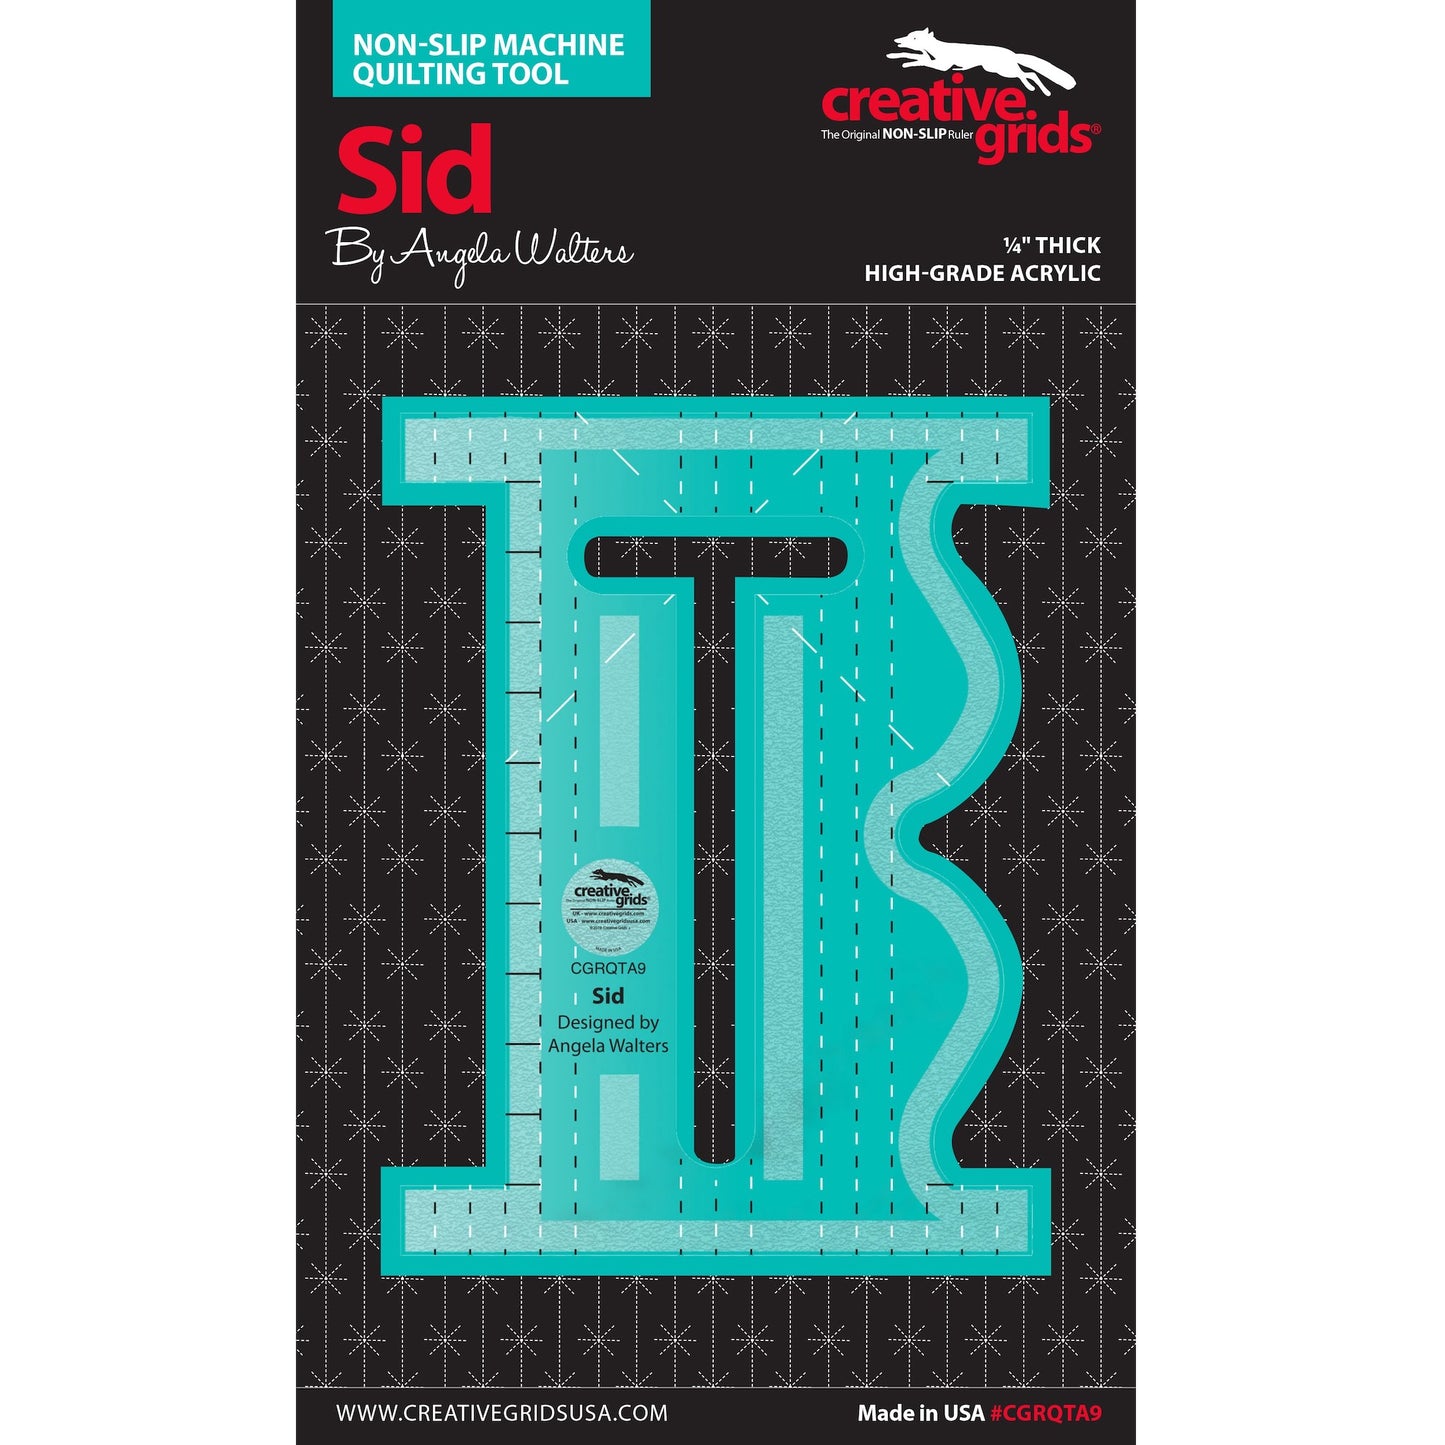 Creative Grids Sid Machine Quilting Tool